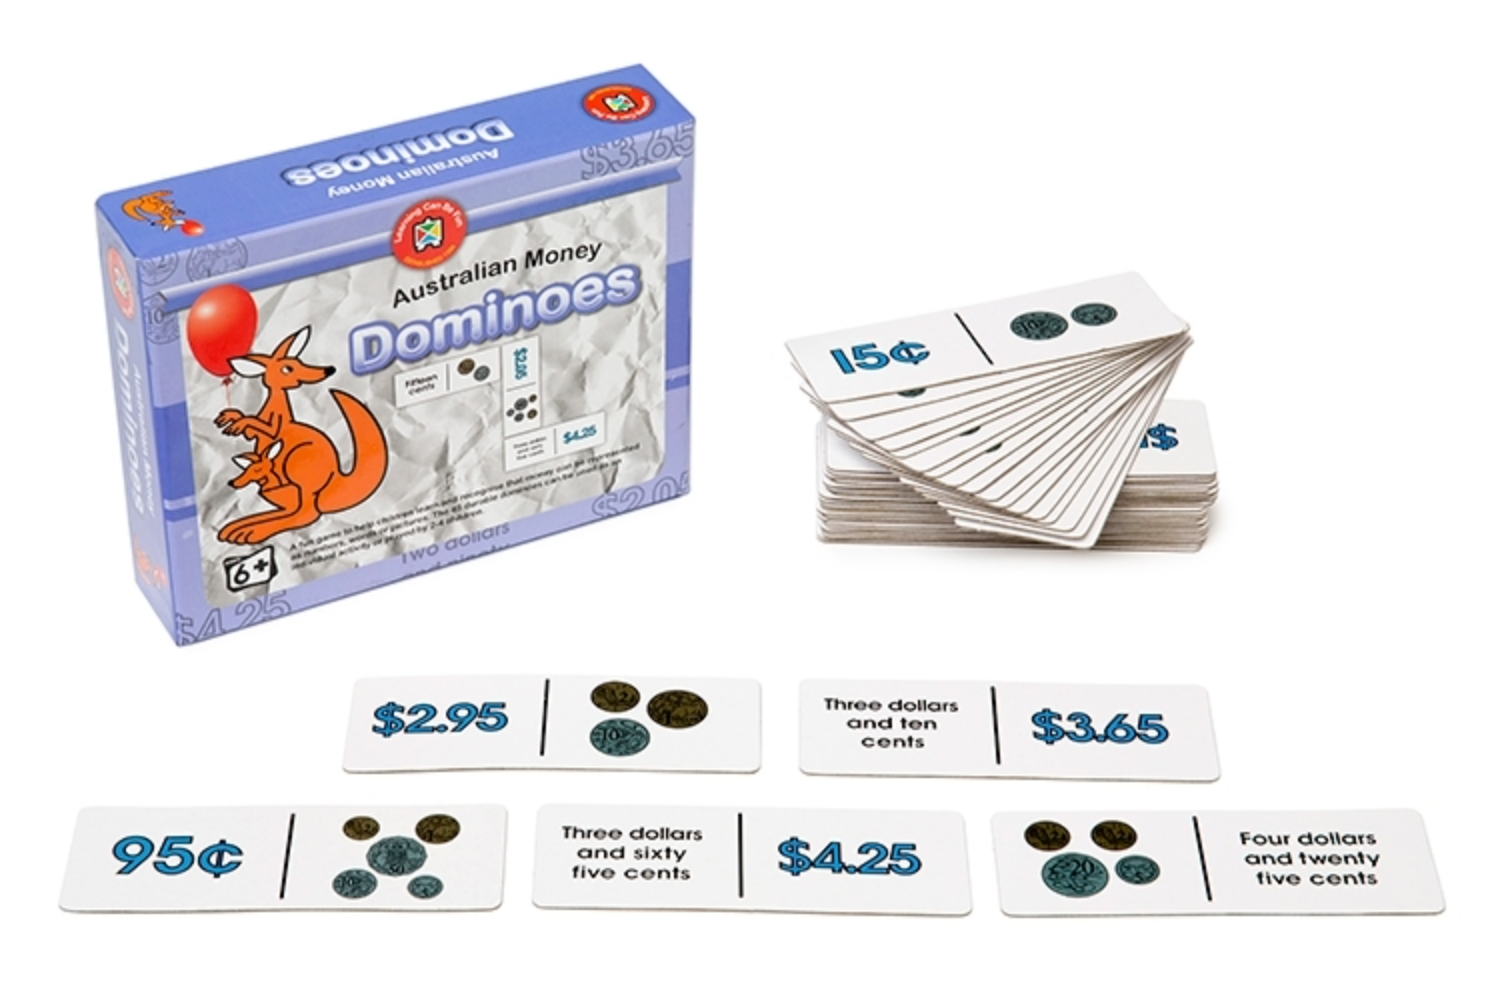 Australian Money Dominoes with domino cards laid out on display in front of packaging box on white background